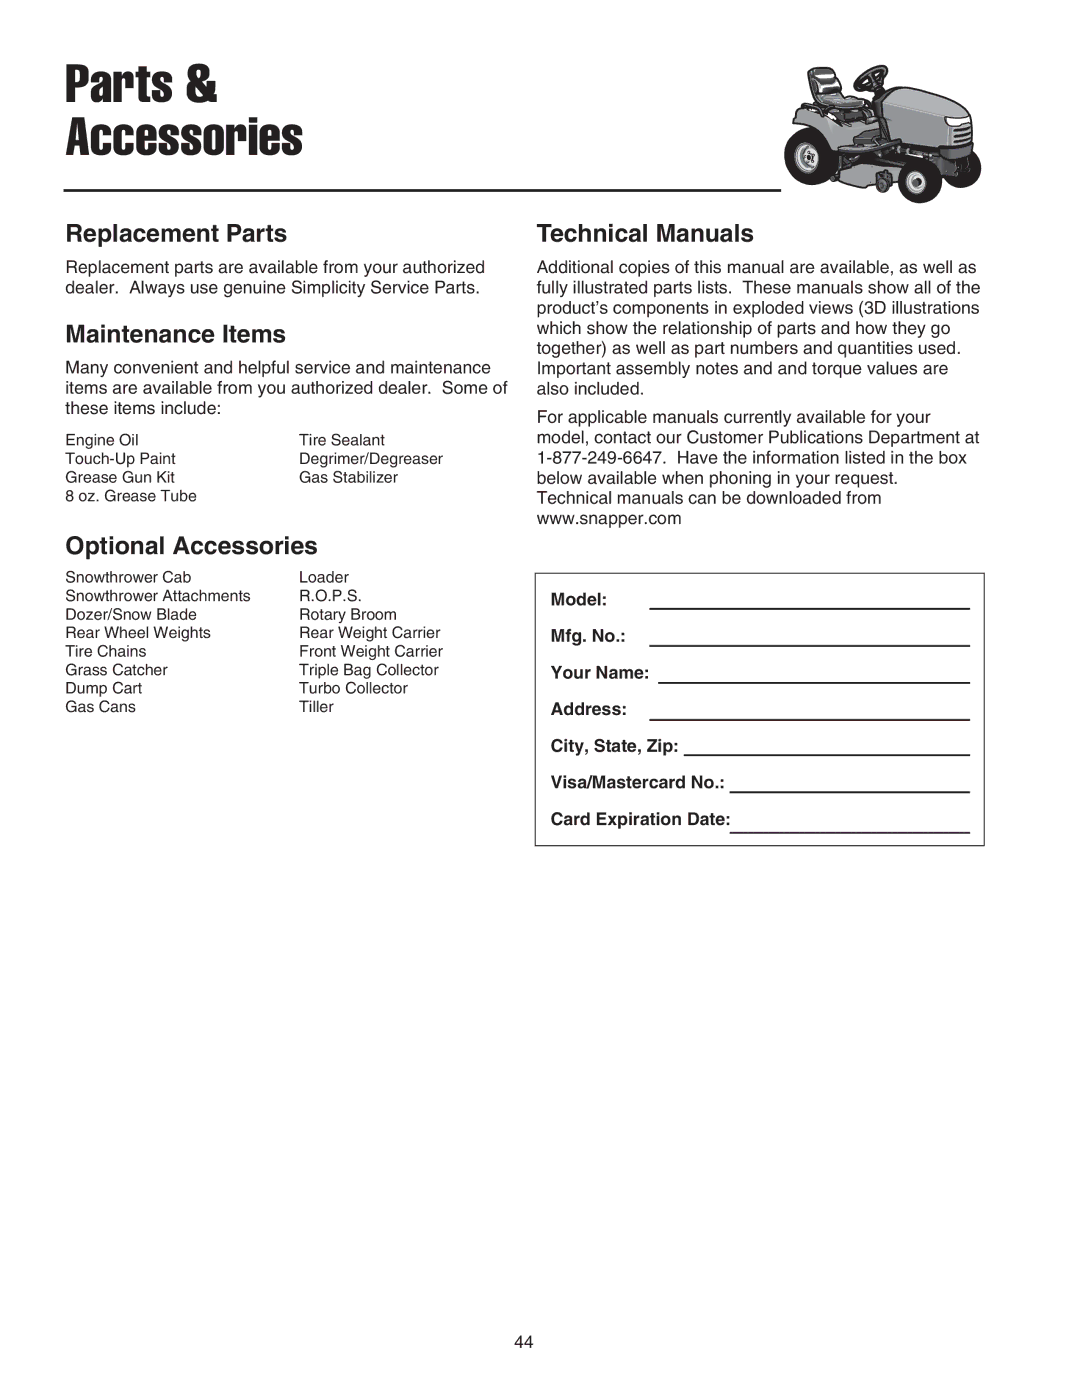 Snapper SGT27540D manual Replacement Parts, Maintenance Items, Technical Manuals, Optional Accessories 